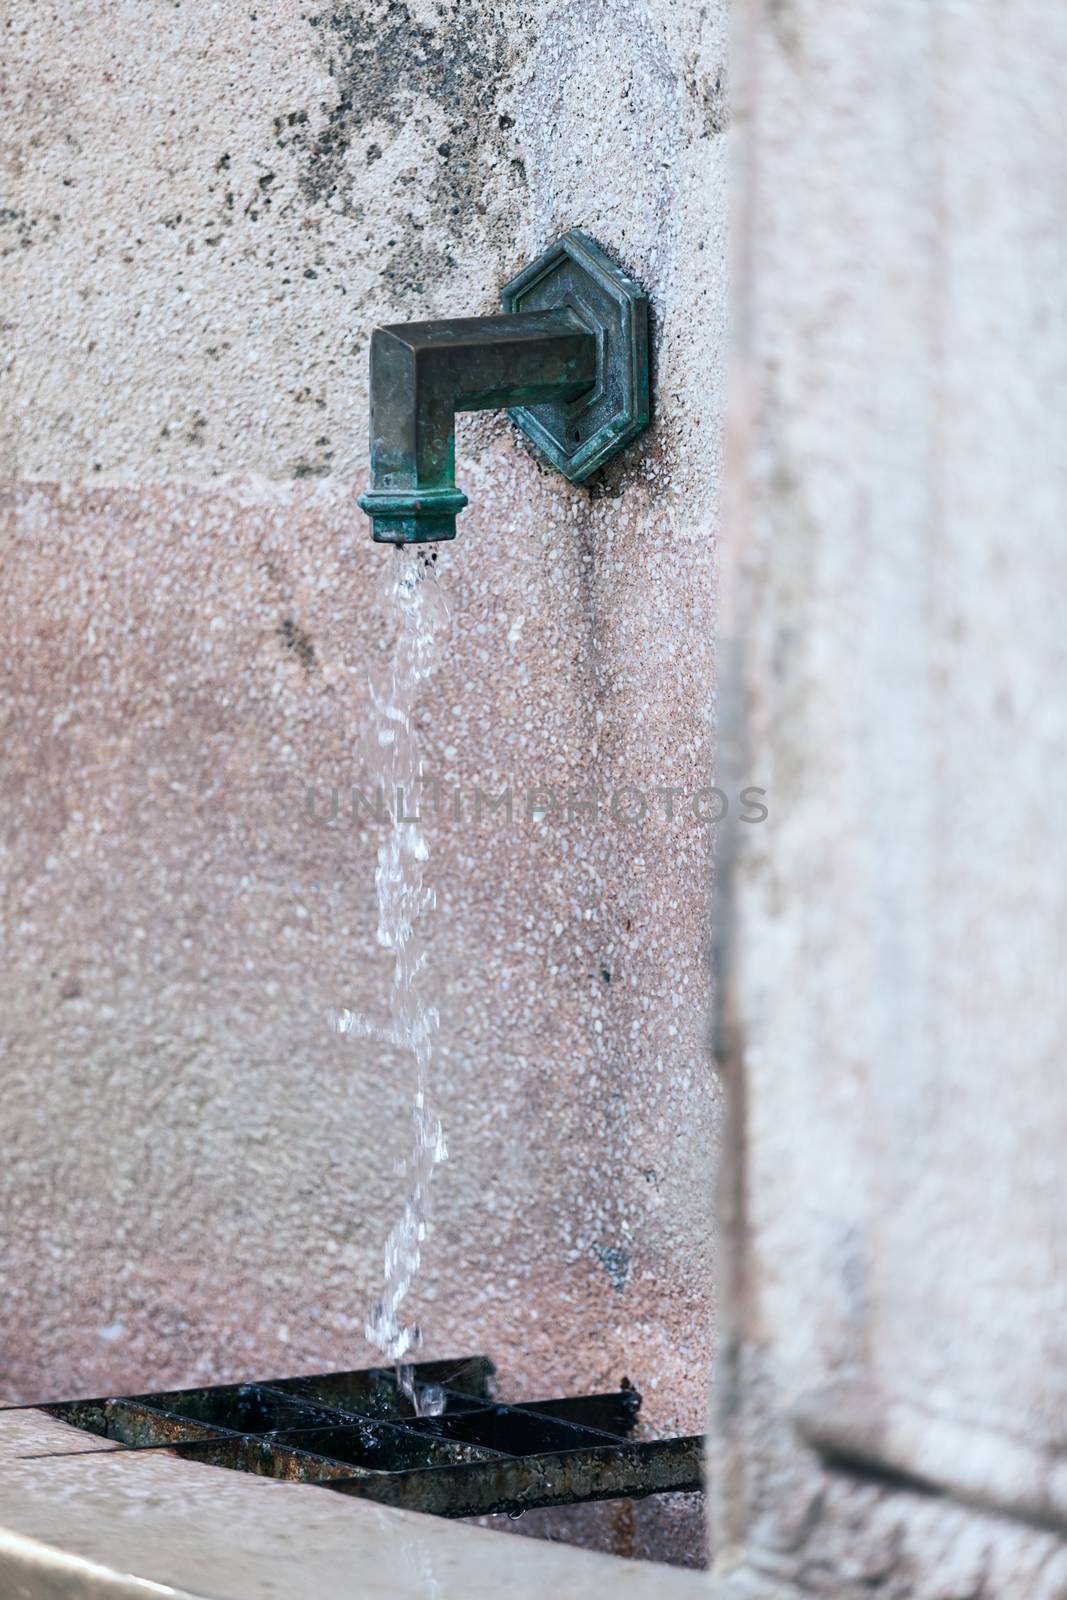 old drinking fountain in the park, note shallow depth of field